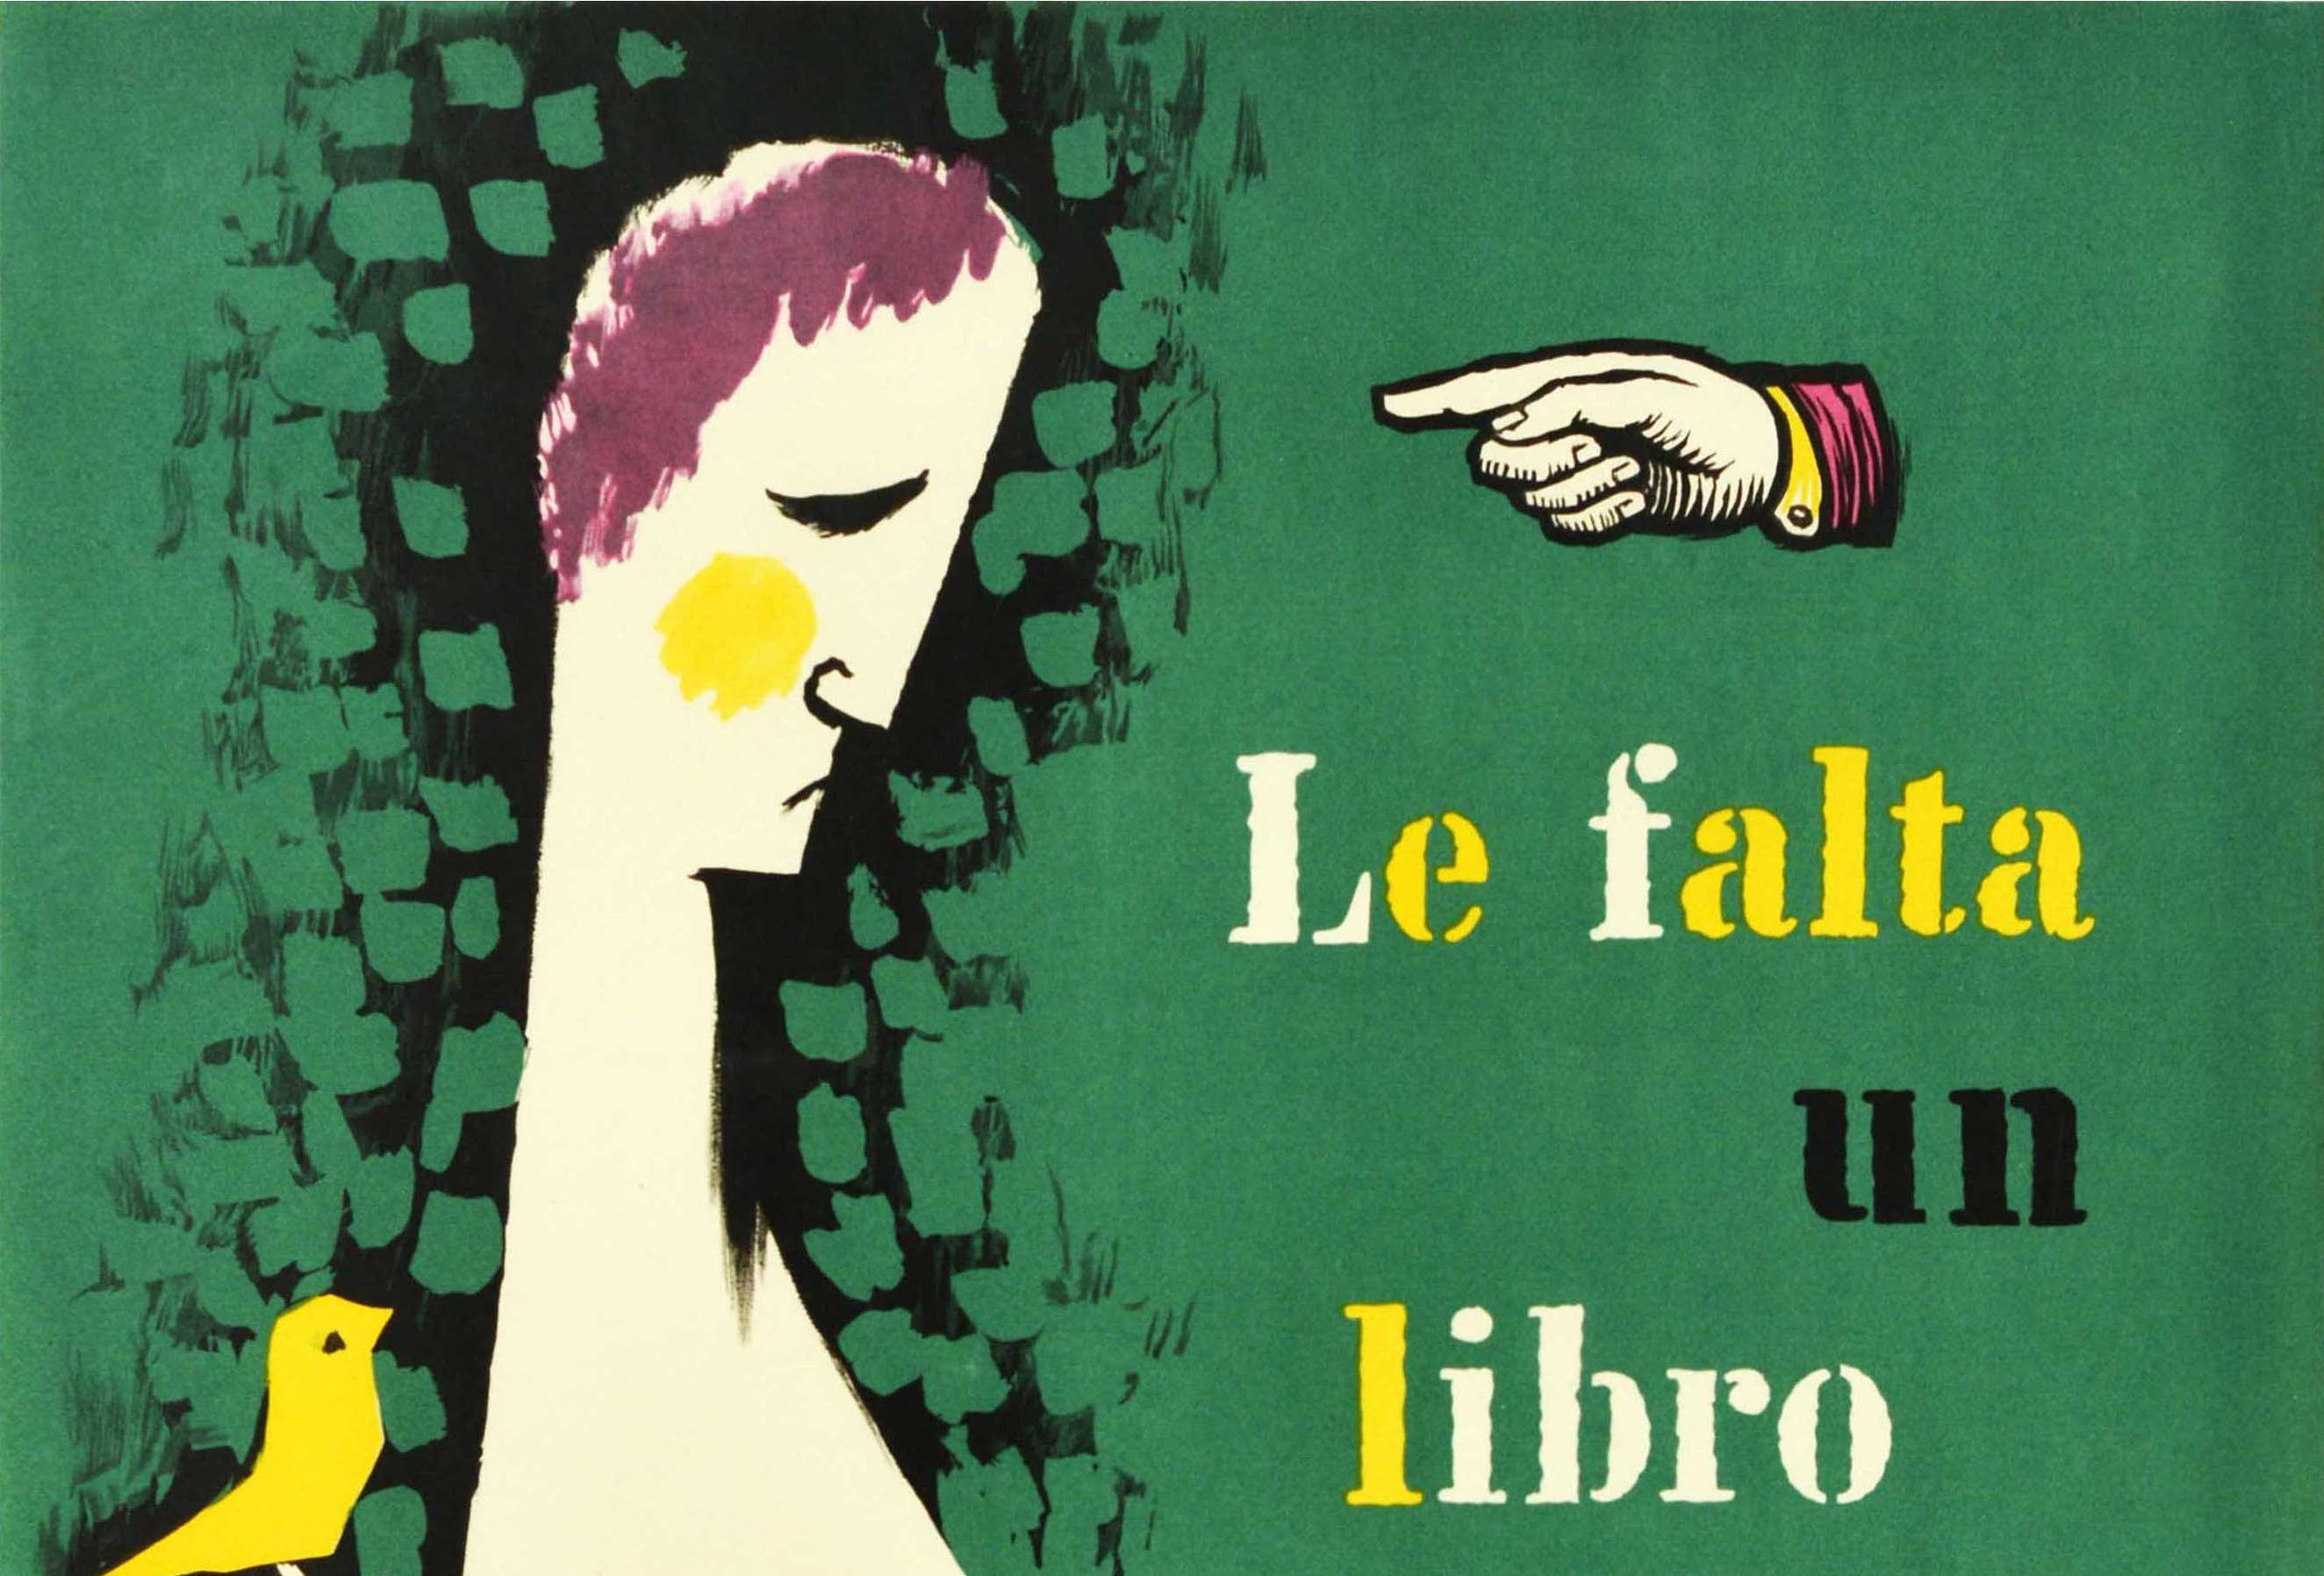 Original vintage poster - Le falta un libro / A book is missing - featuring a great illustration by the Spanish artist and graphic designer Ricard Giralt-Miracle (1911-1994) depicting a hand above the colourful lettering pointing at a sad man